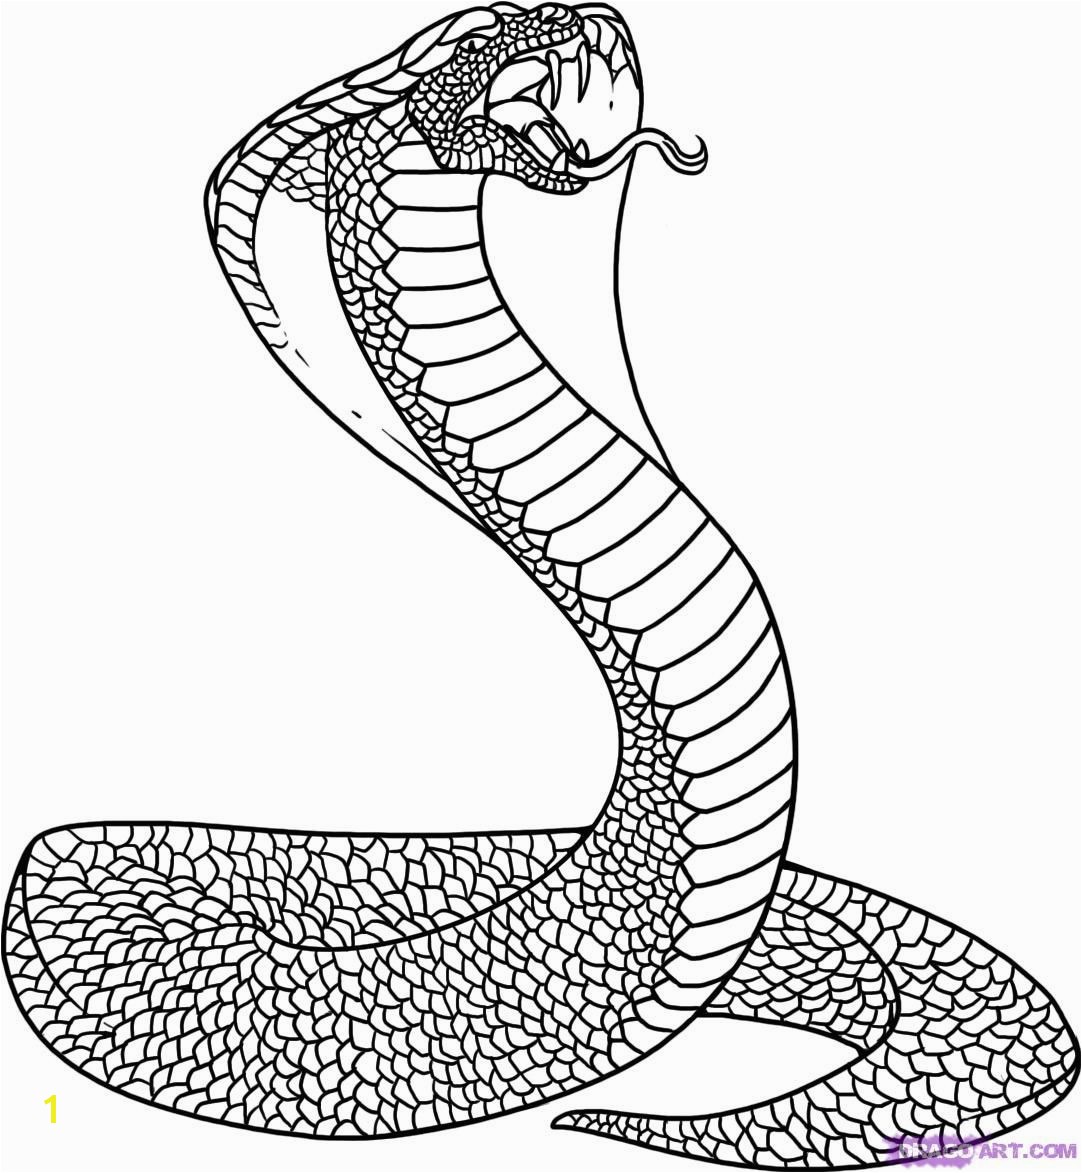 Garter Snake Coloring Page King Snake Coloring Page Coloring Pages for Kids 2